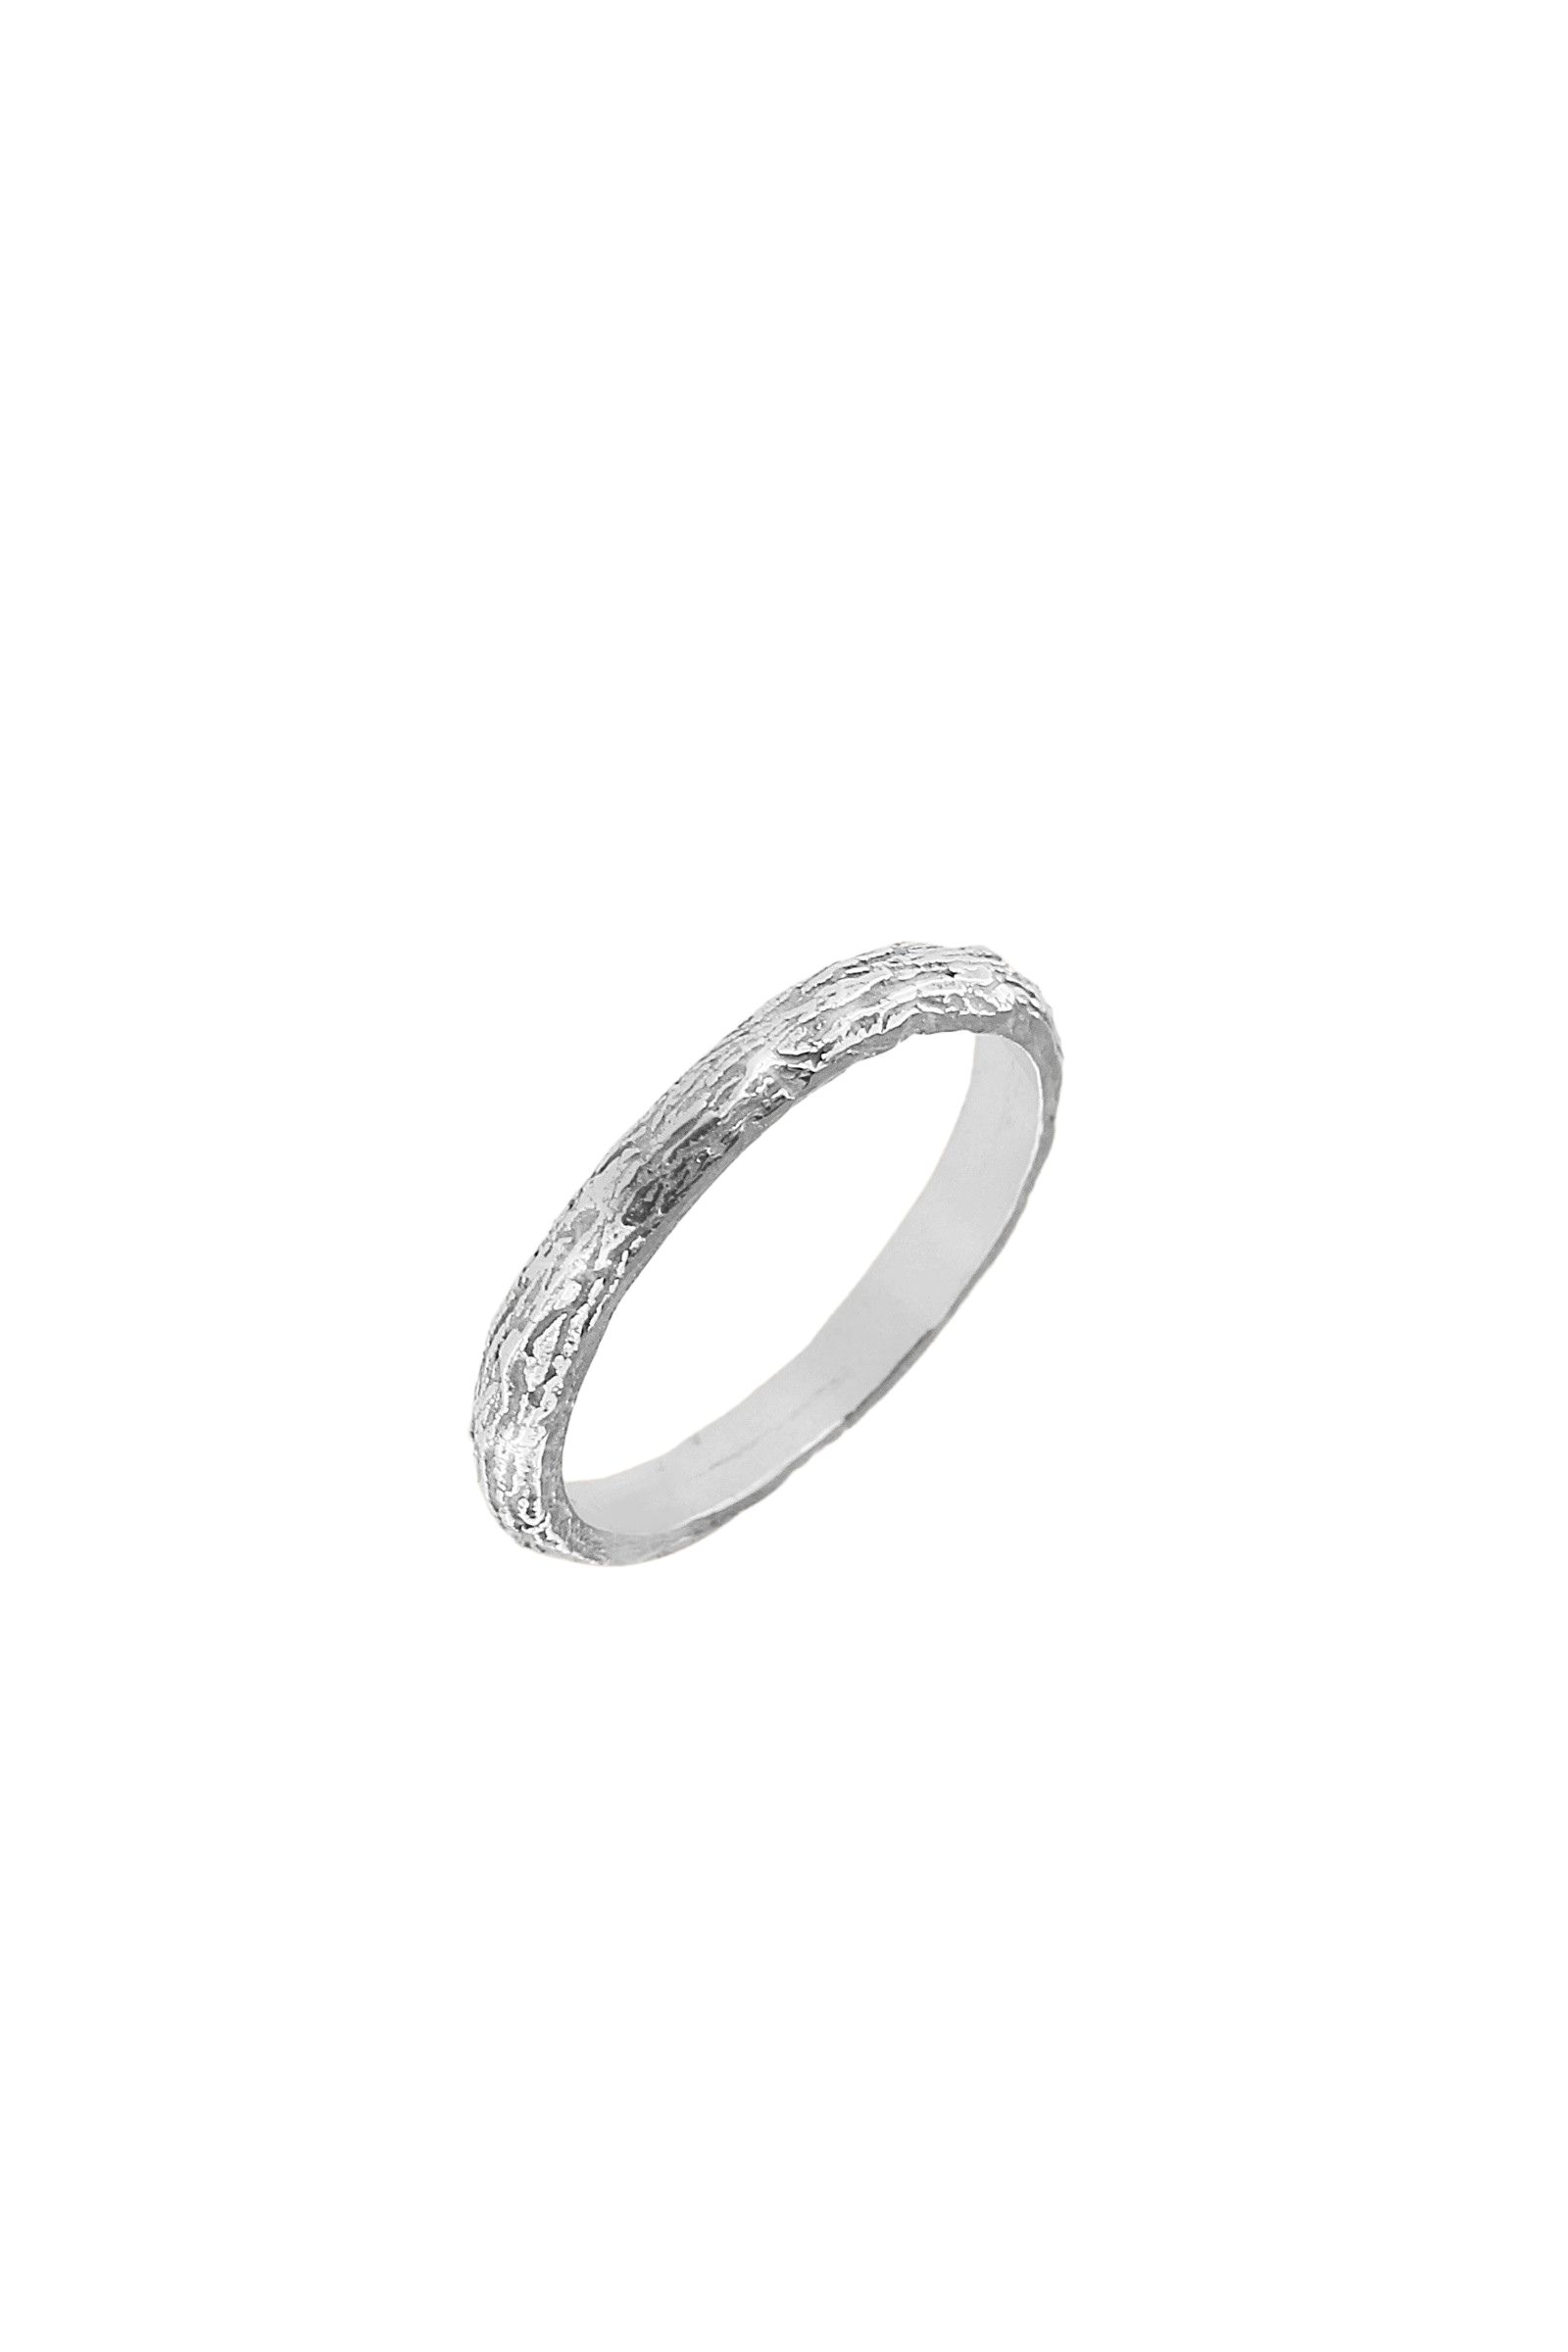 AE9-Sterling-Silver-925-Band-Ring-1_